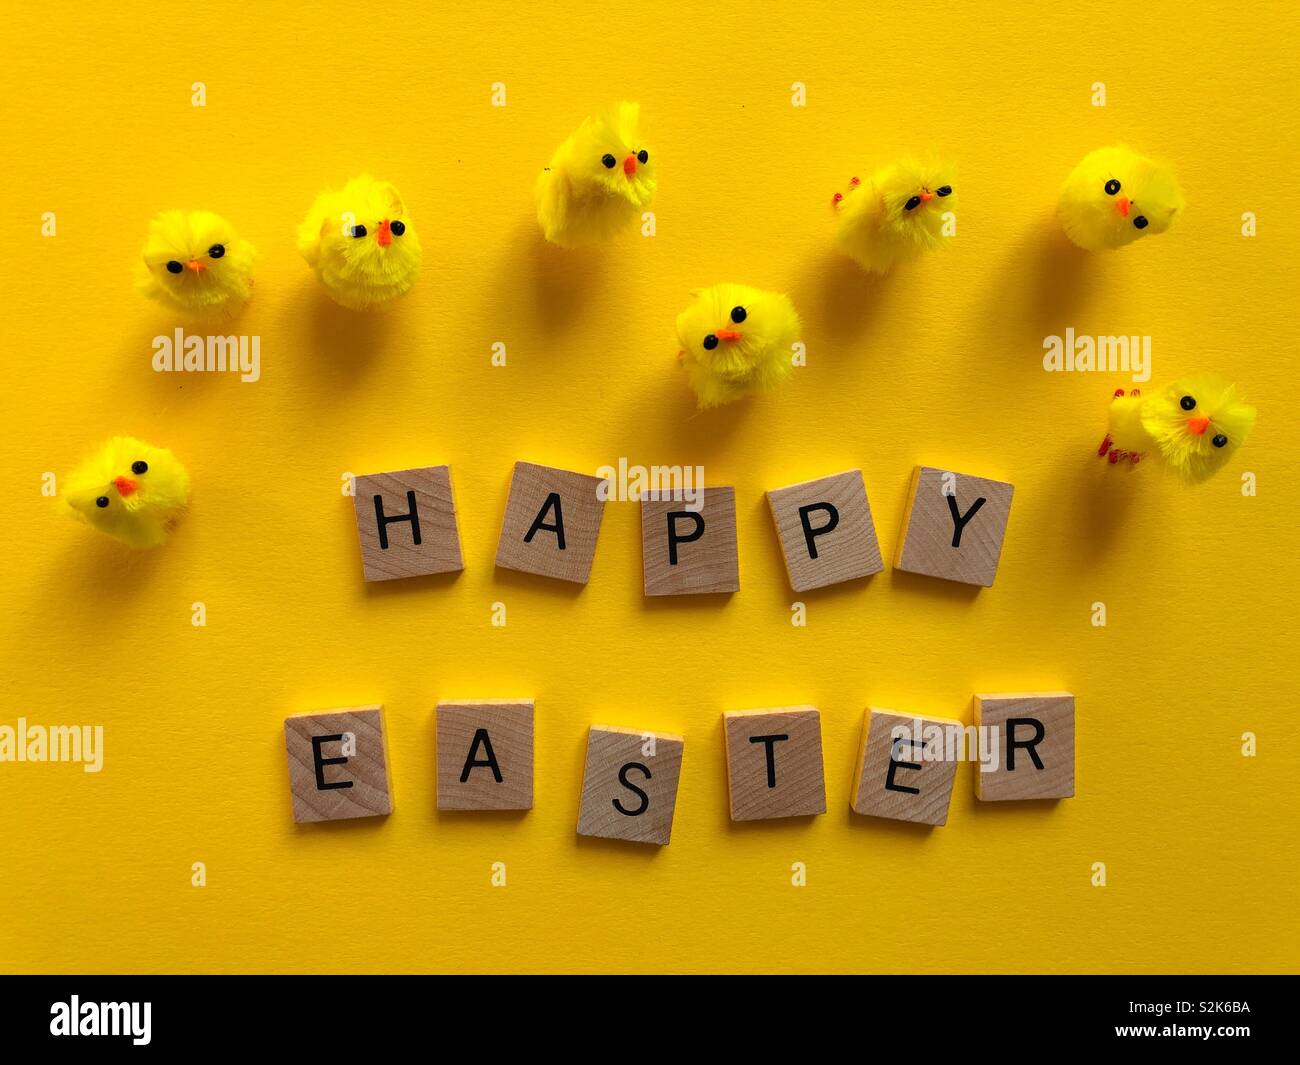 Happy Easter message with fluffy chicks on bright yellow background Stock Photo